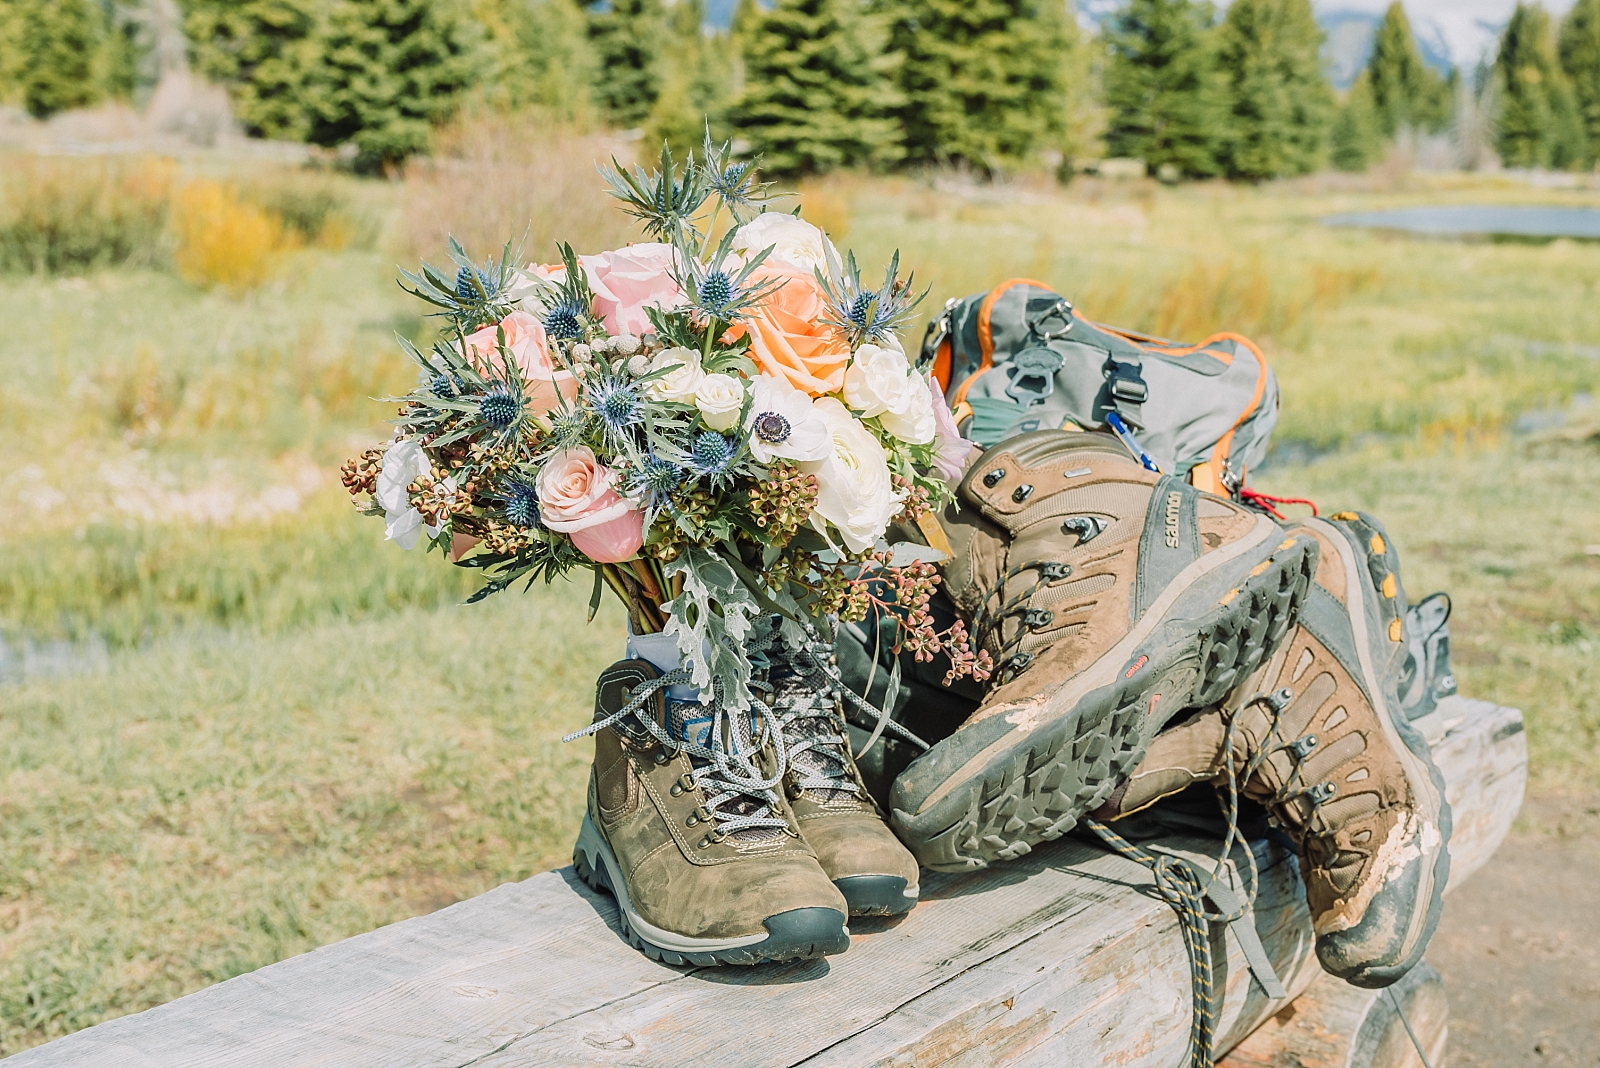 bride and groom backpacking gear and bouquet with wedding flowers